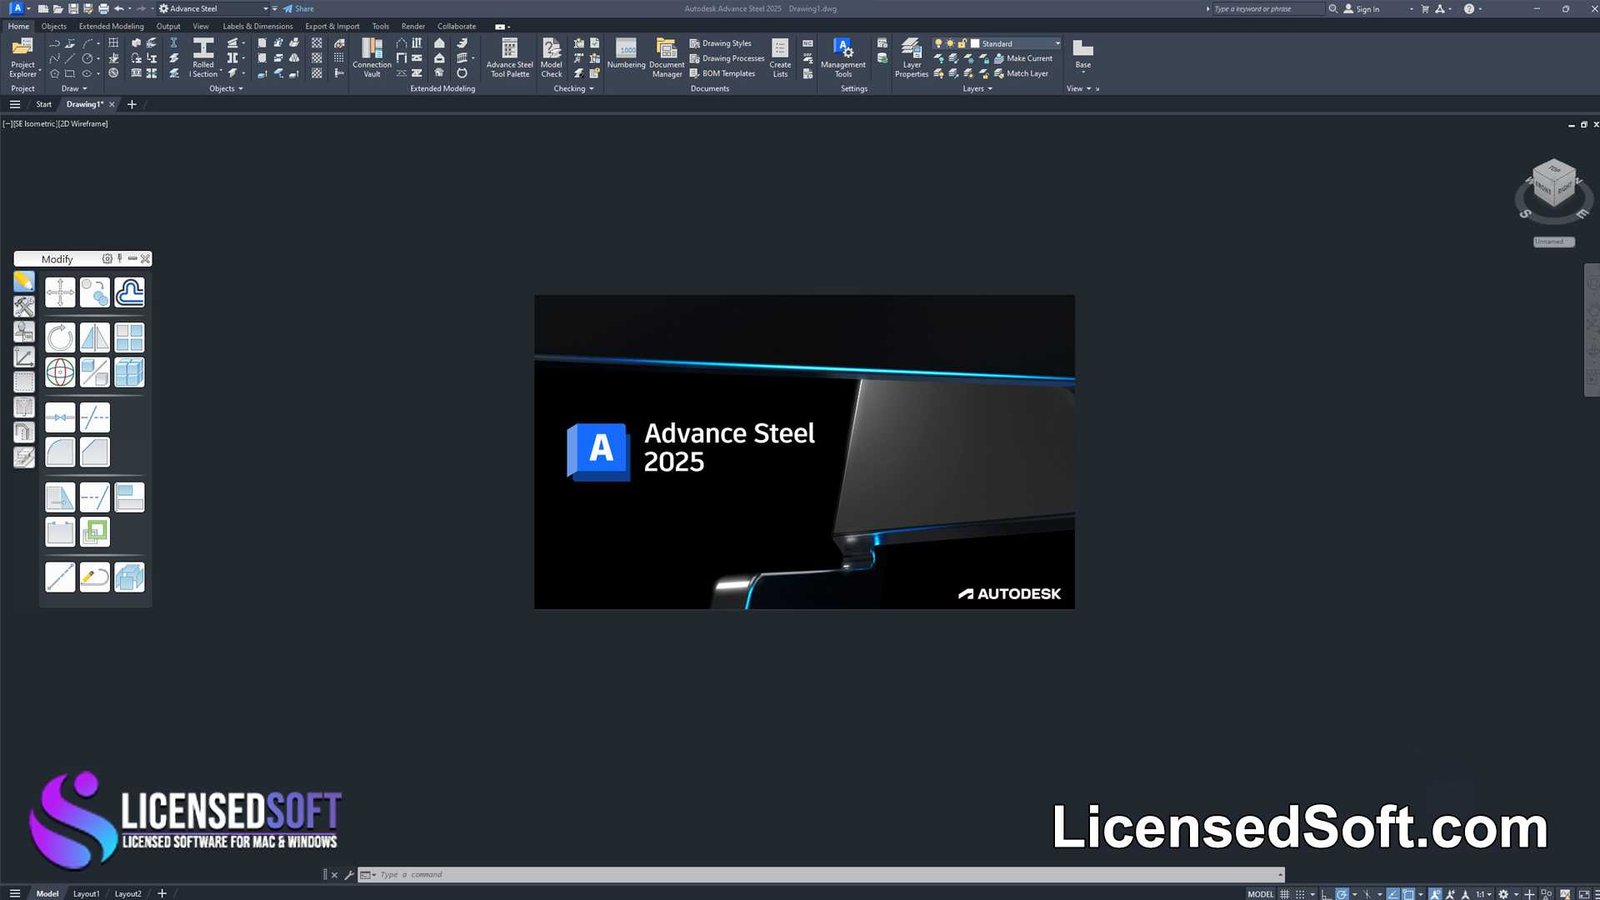 Autodesk Advance Steel 2025 Perpetual License By LicensedSoft